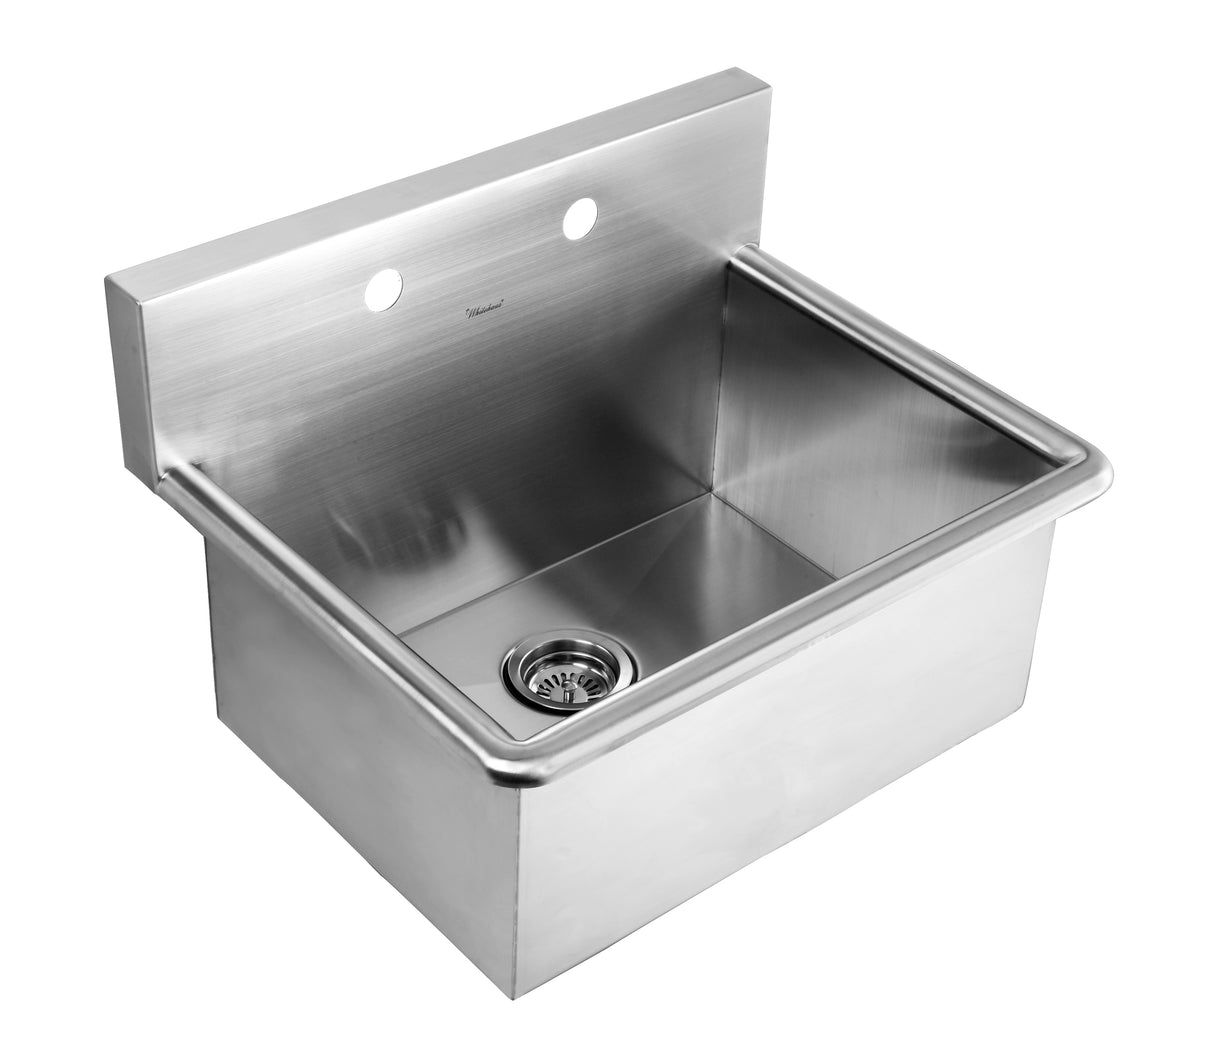 Noah's Collection Brushed Stainless Steel Commercial Drop-in or Wall Mount Utility Sink